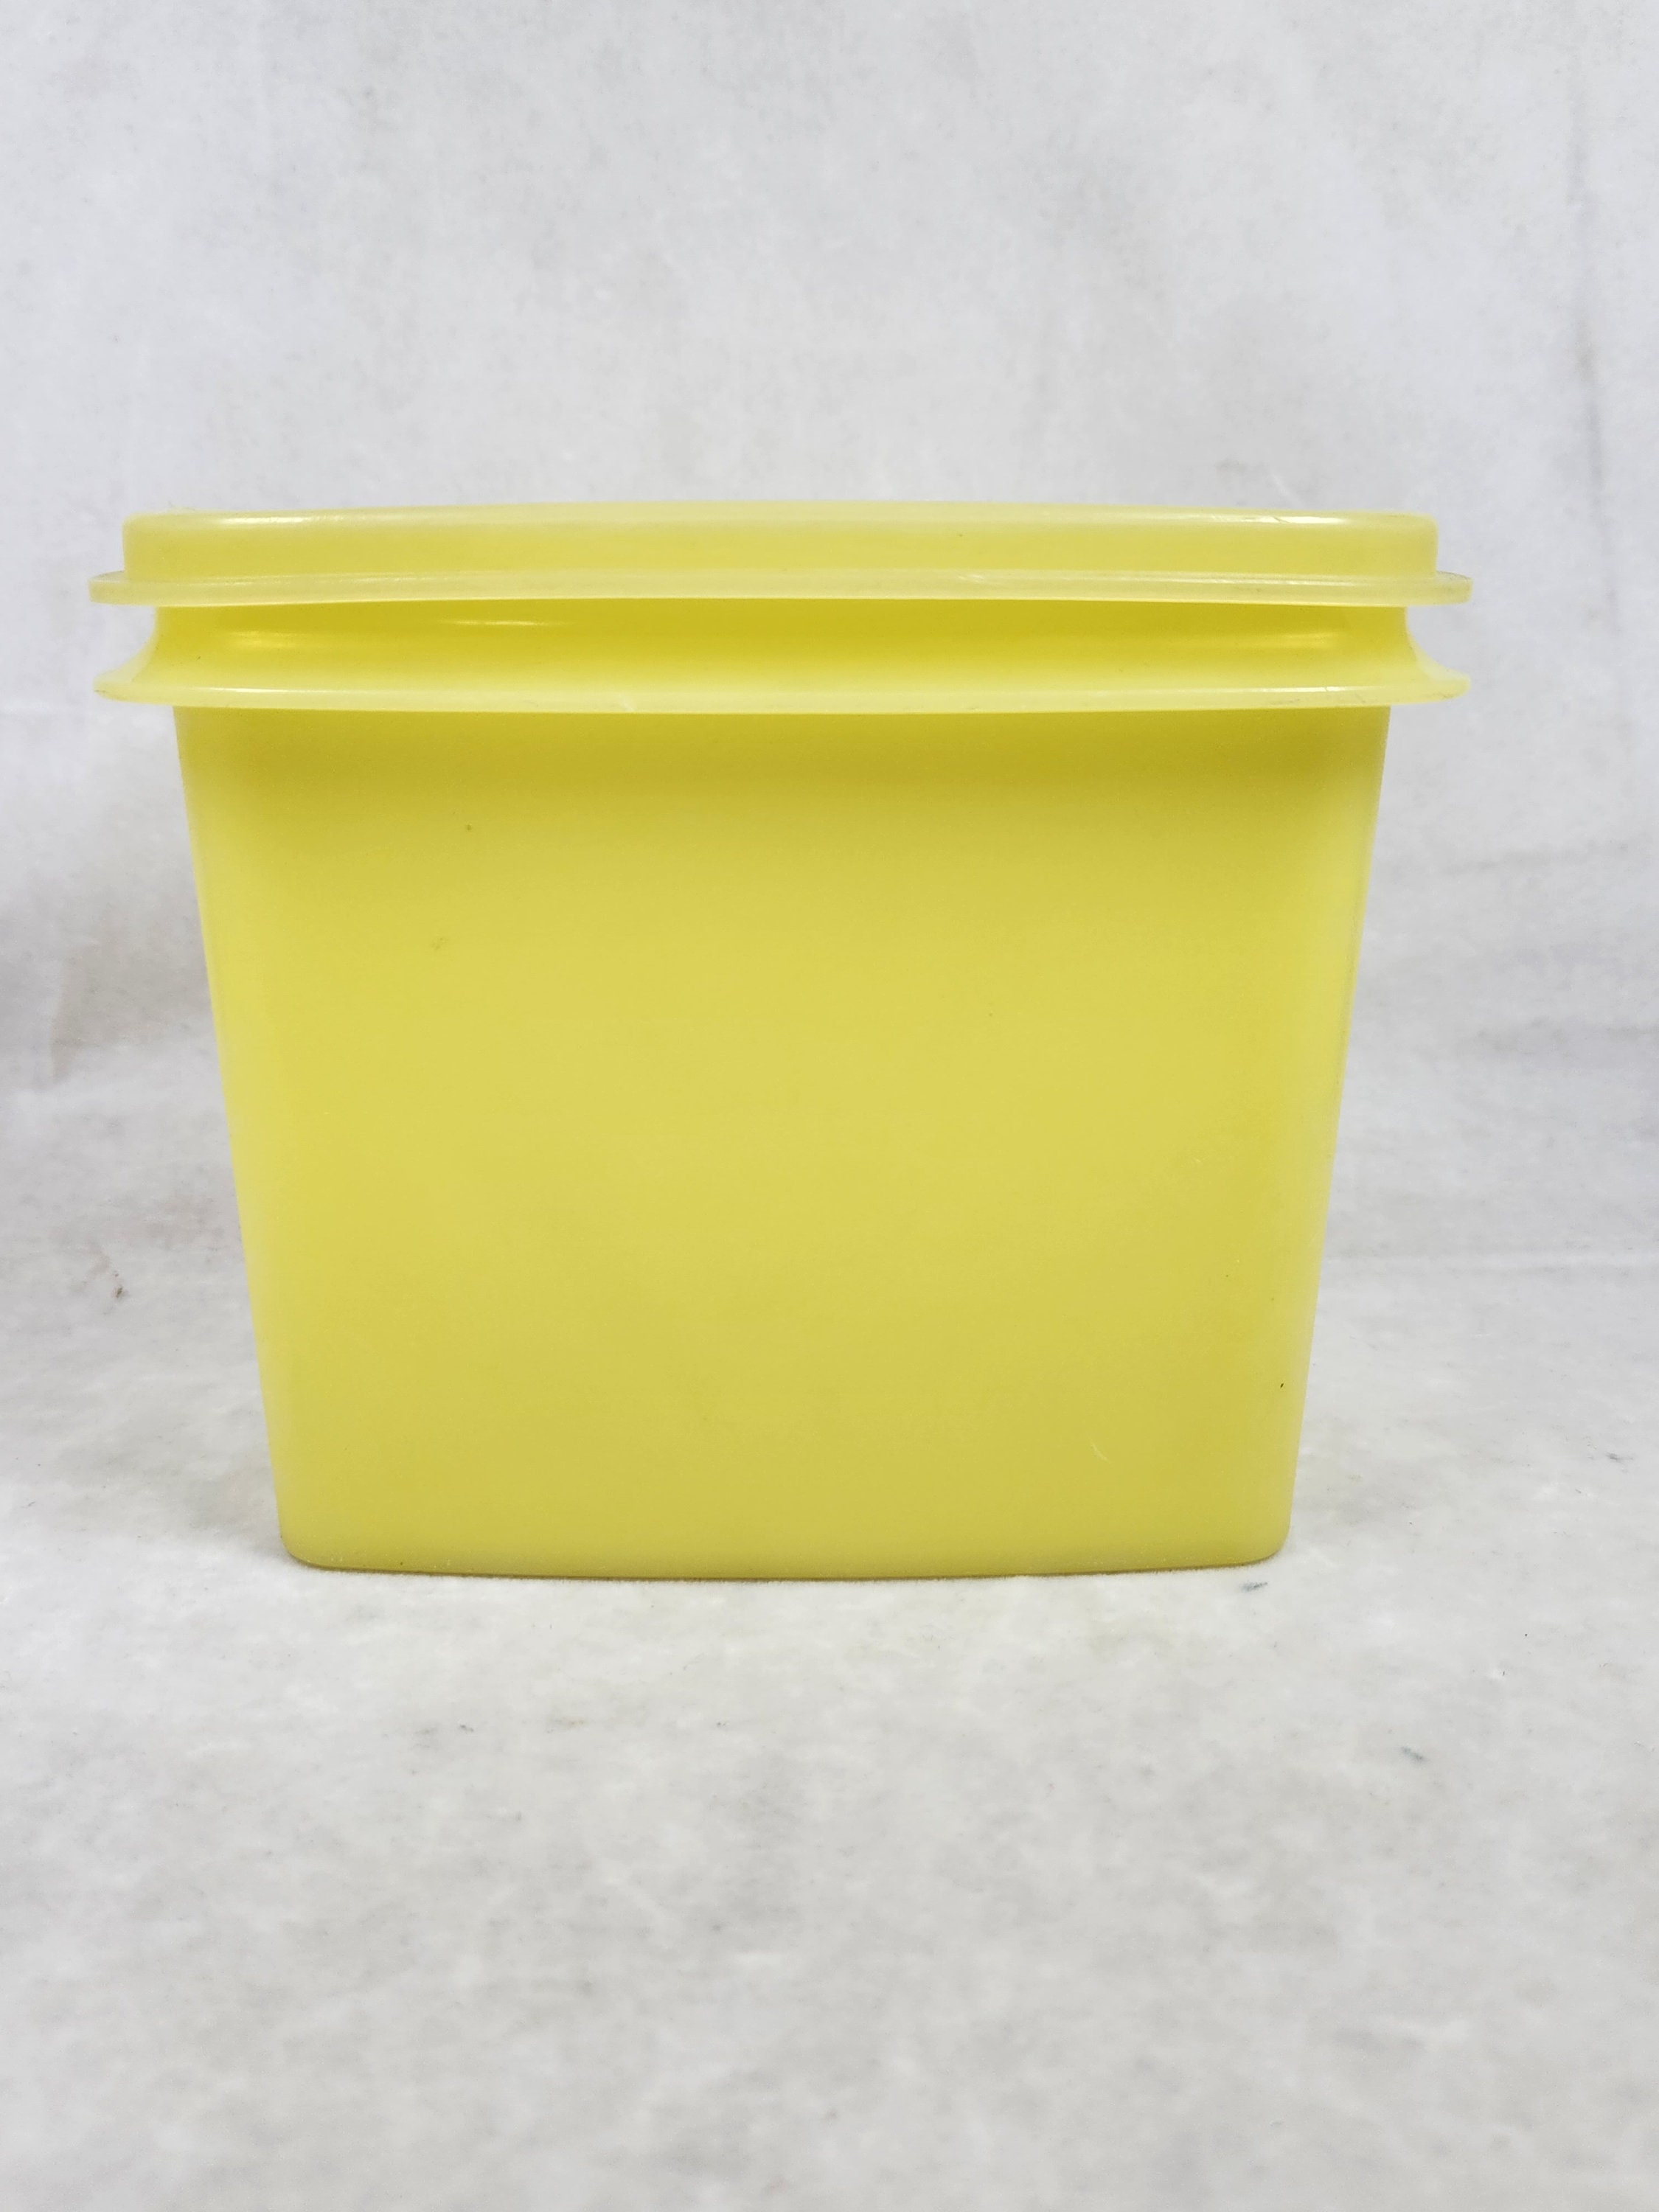 Tupperware Shelf Saver Containers in Sunny Yellow Storage Dishes